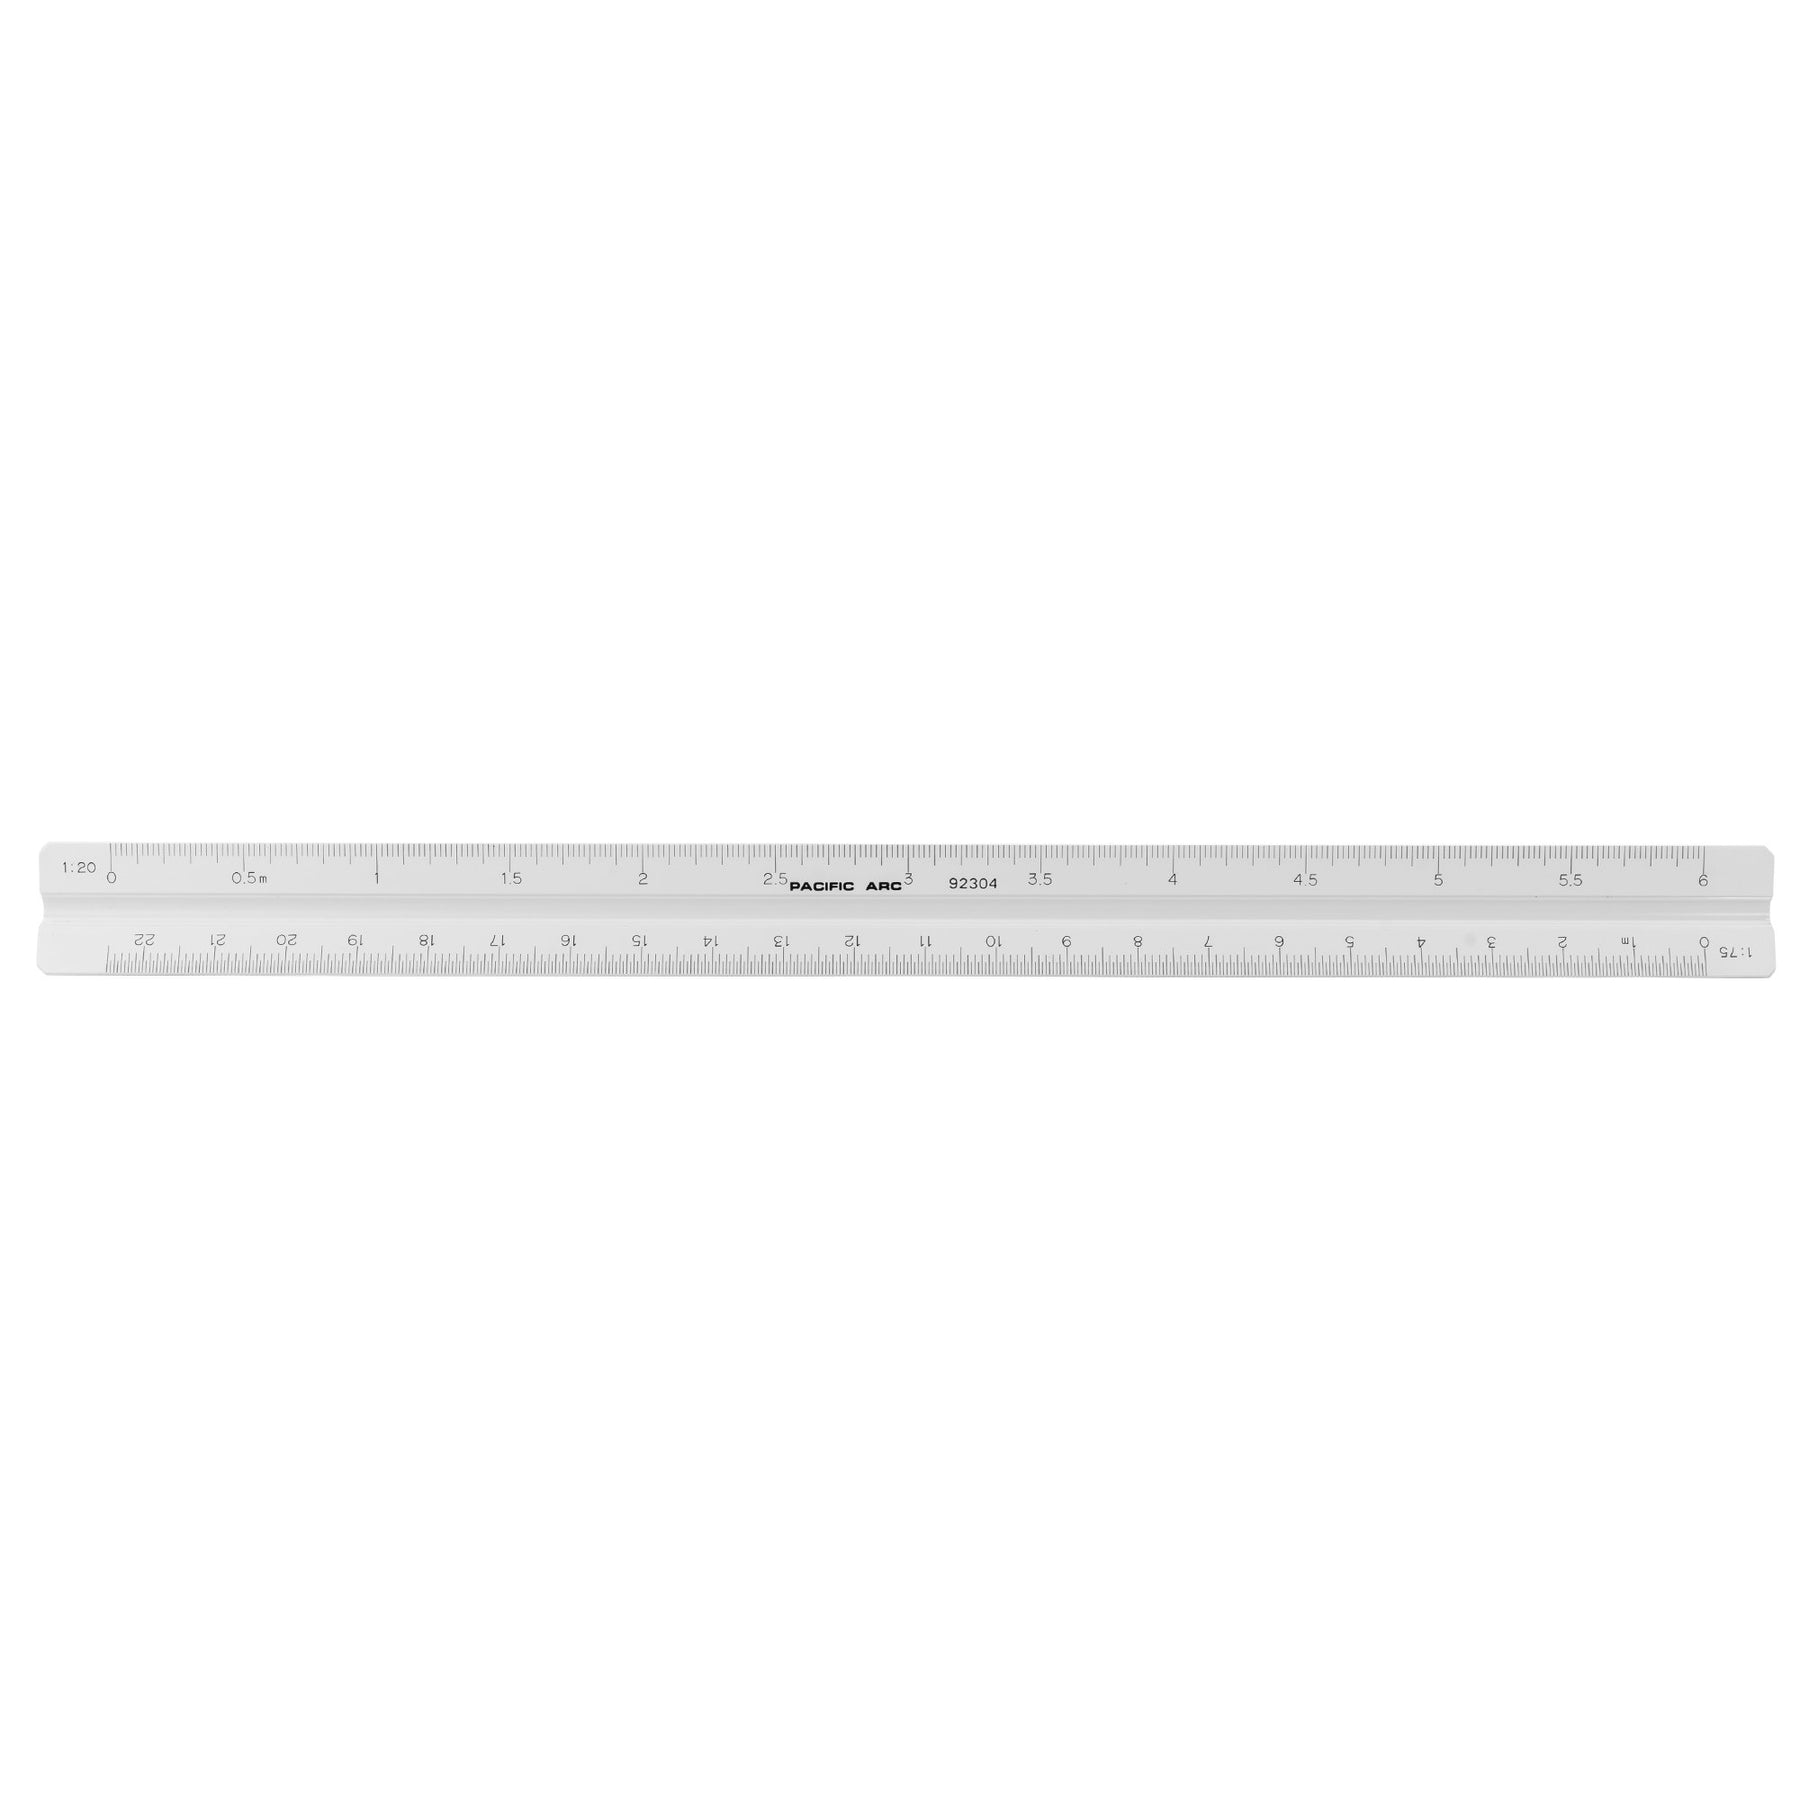 Pacific Arc, Architect Plastic Scale Ruler, Divided by: 1/16th, 3/32, 1/8, 3/16, 1/4, 3/8, 1/2, 3/4, 1, 1-1/2, and 3 inch Scale Degrees. 12 inch